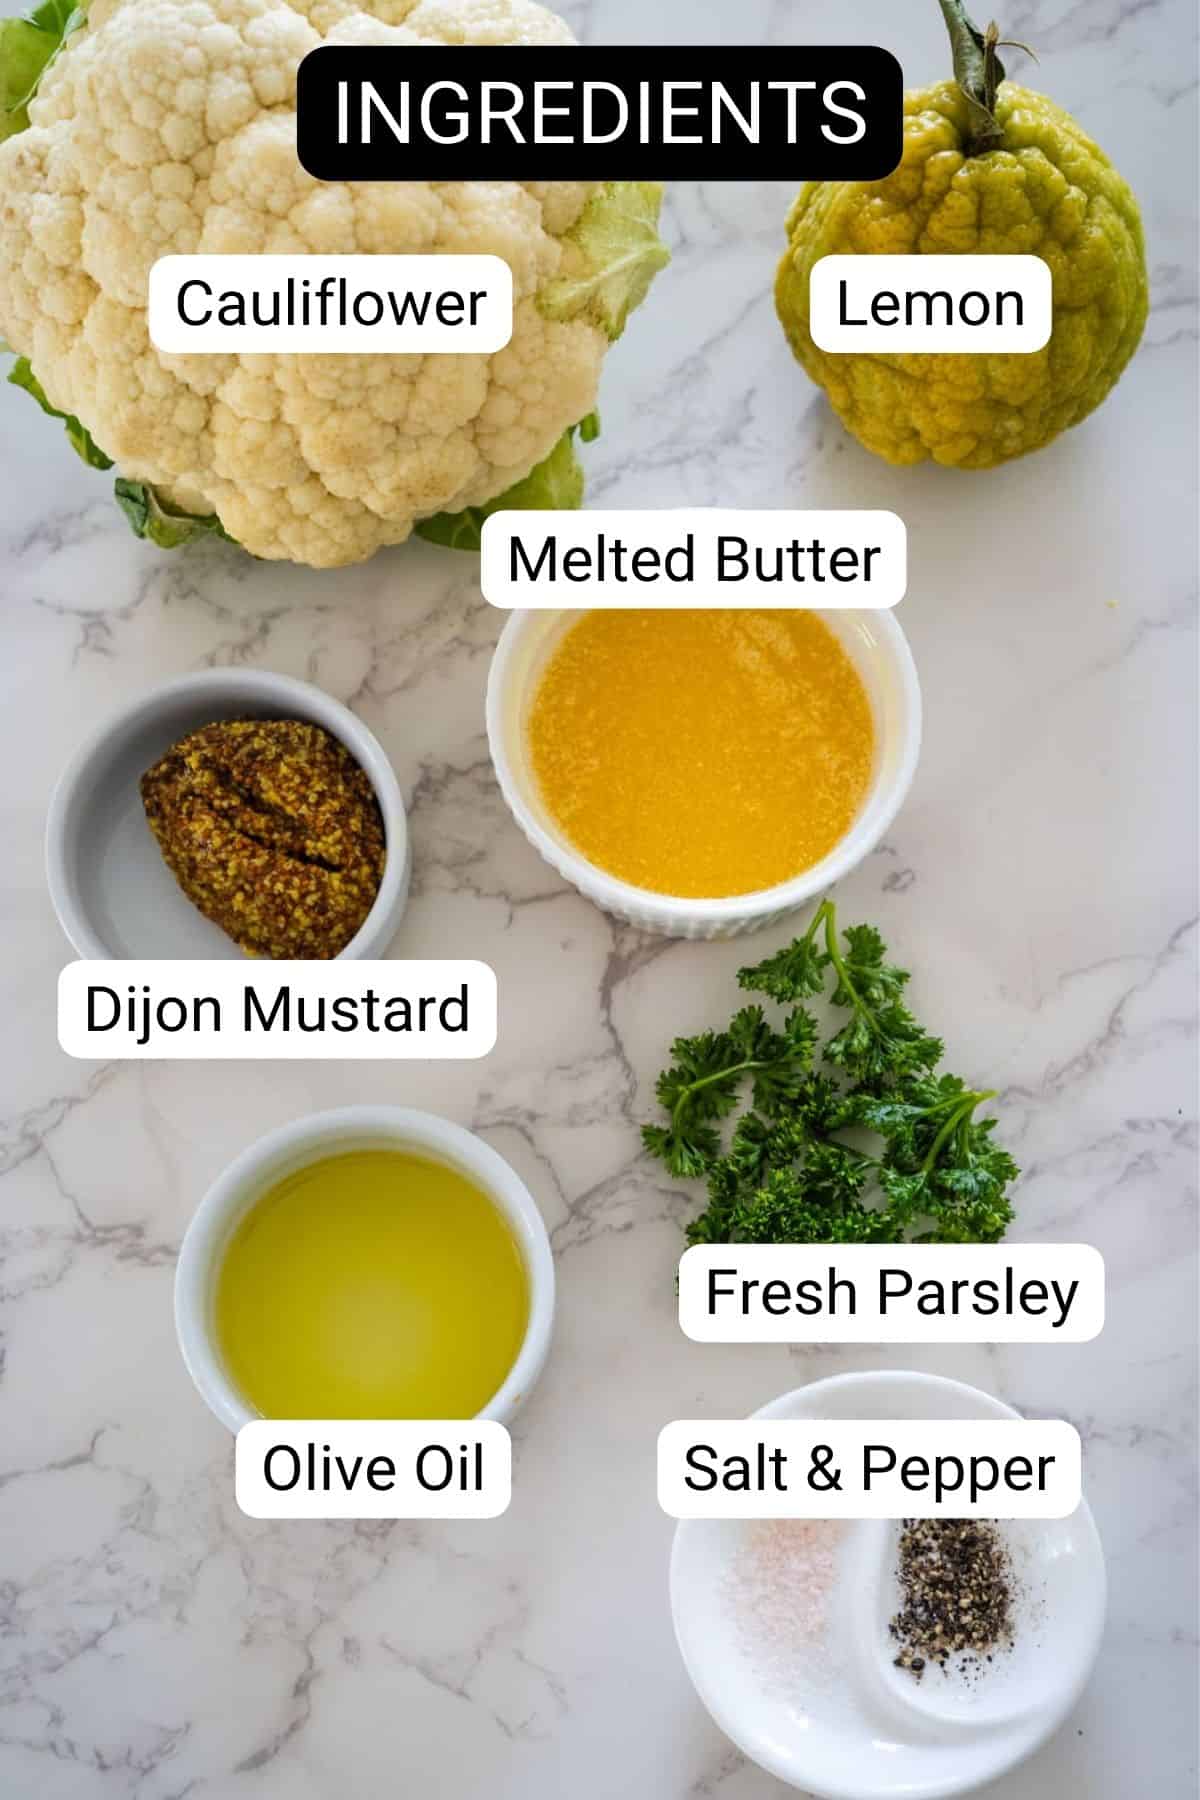 Top-down view of various ingredients labeled for a keto roasted cauliflower recipe, including cauliflower, lemon, melted butter, dijon mustard, olive oil, fresh parsley, and salt & pepper on a marble surface